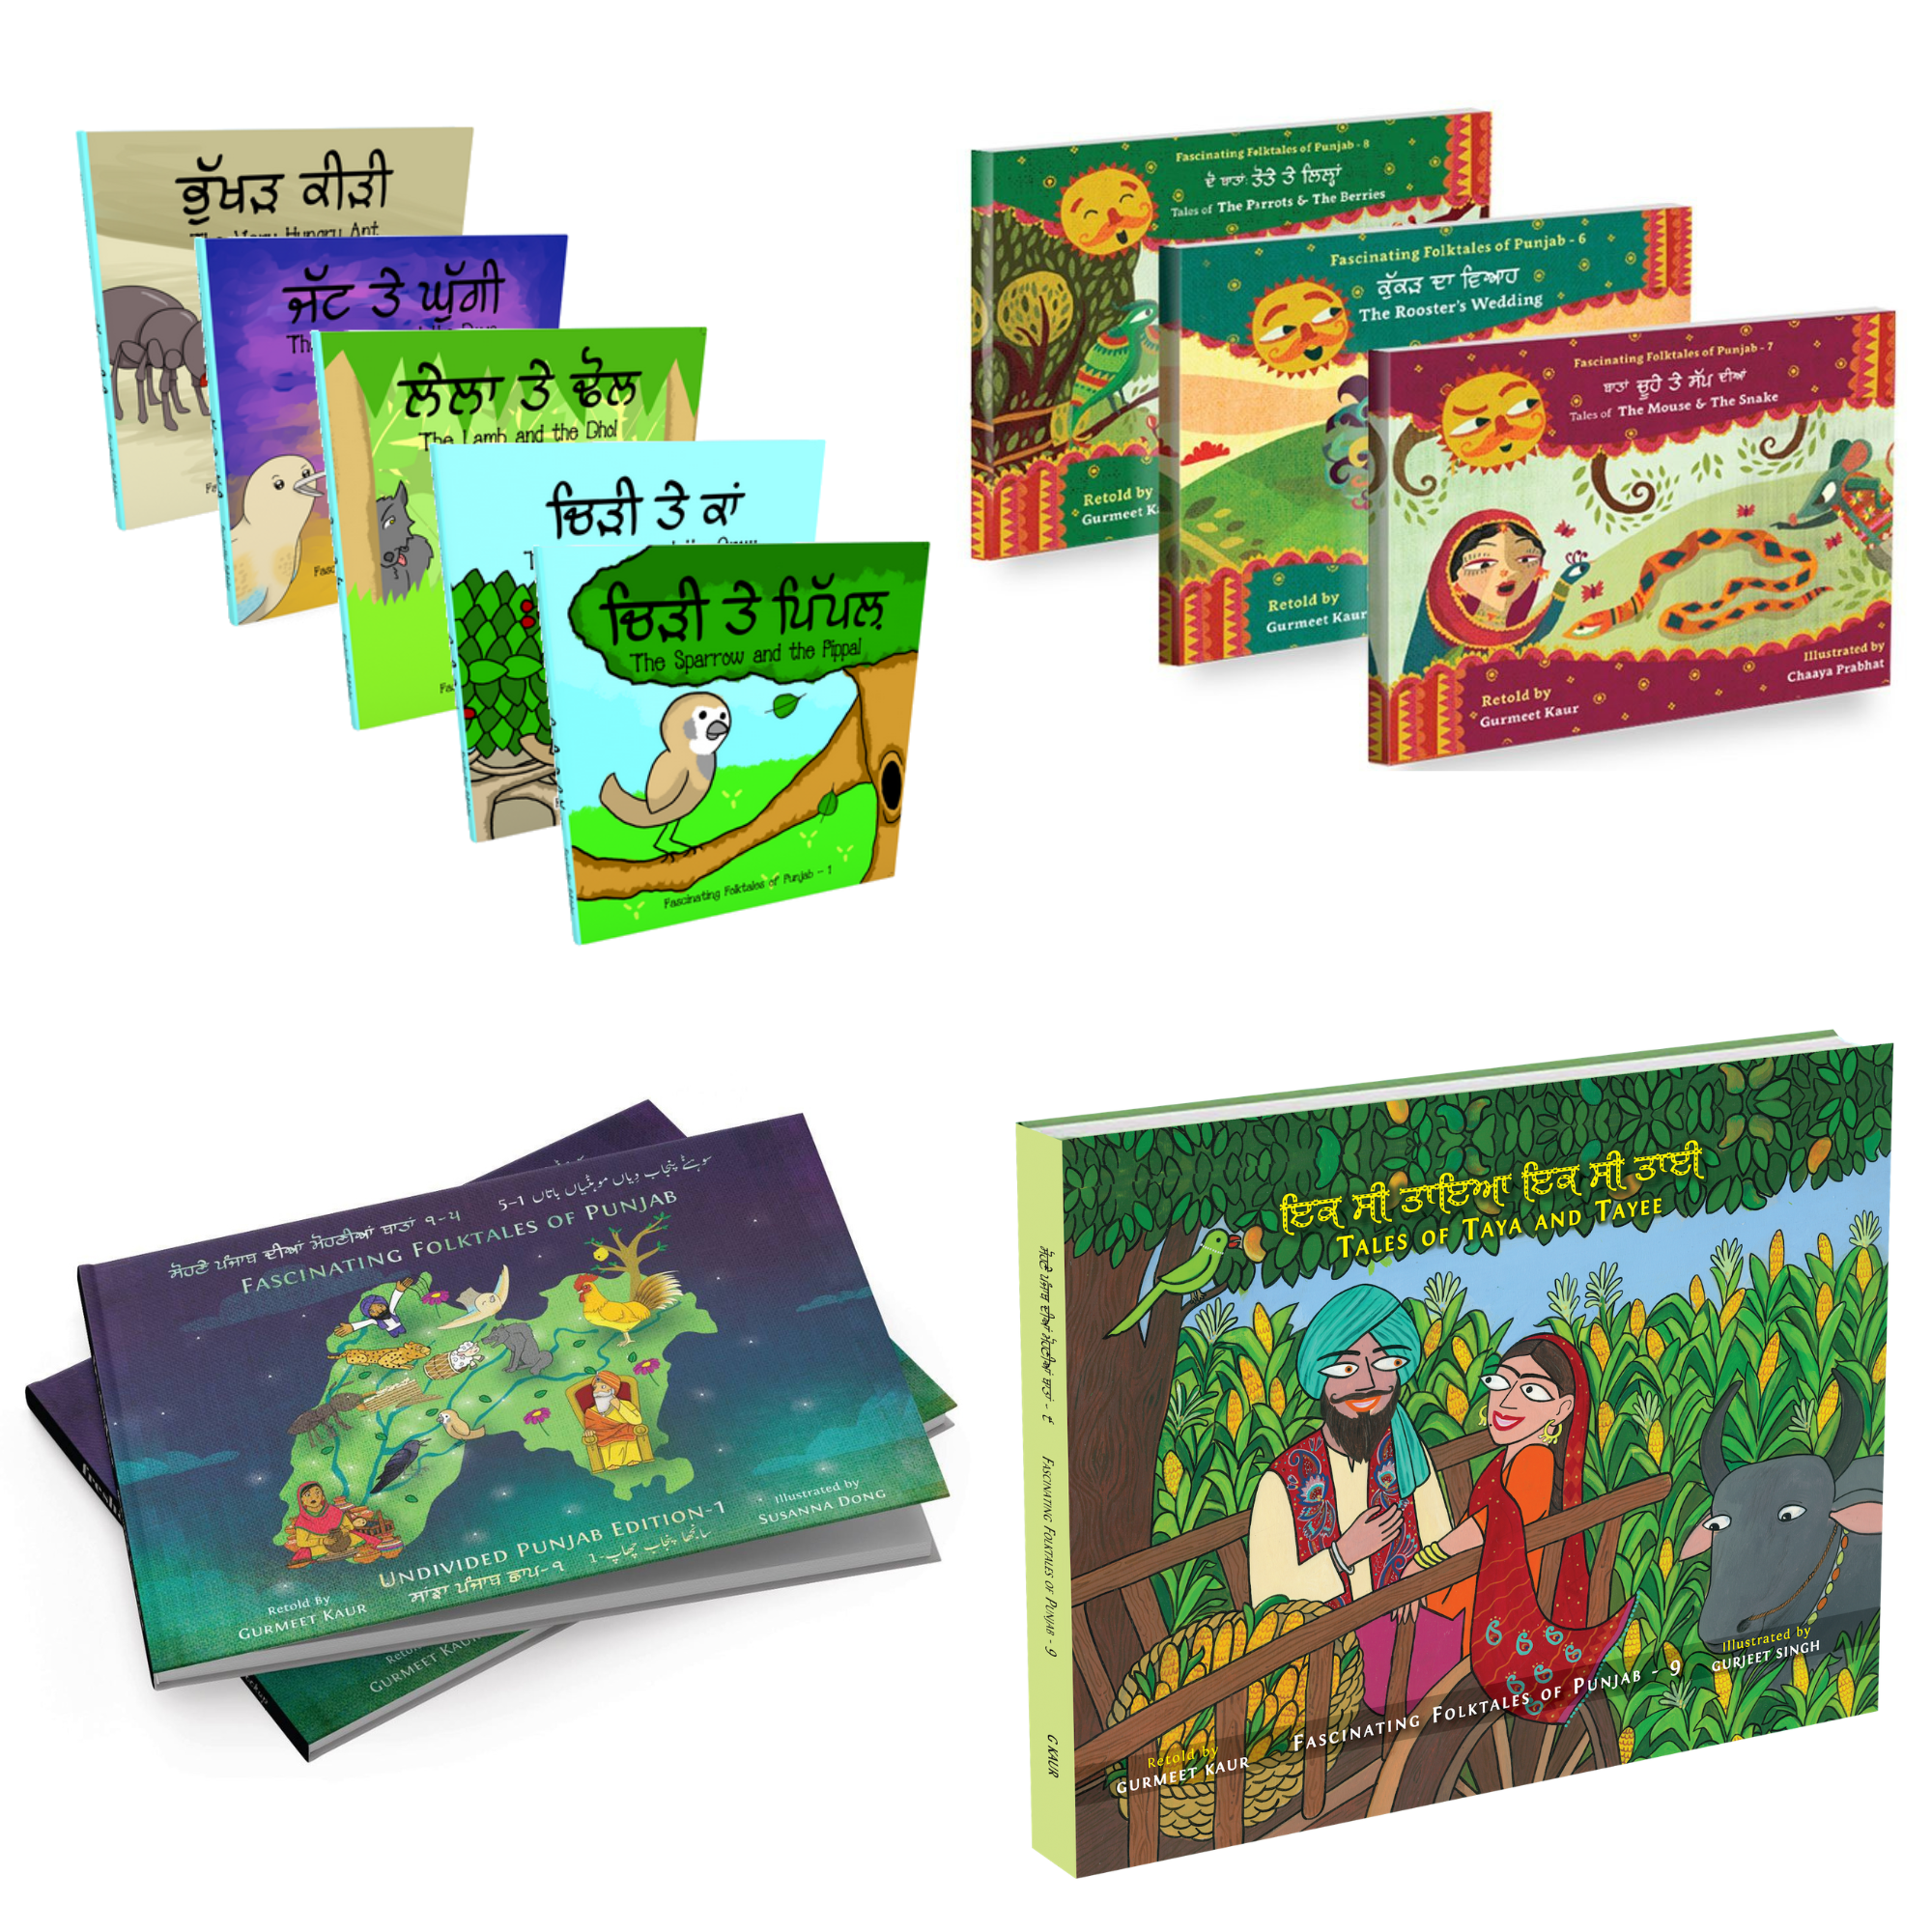 Entire Folktales Collection 1-9 + Undivided Punjab Edition